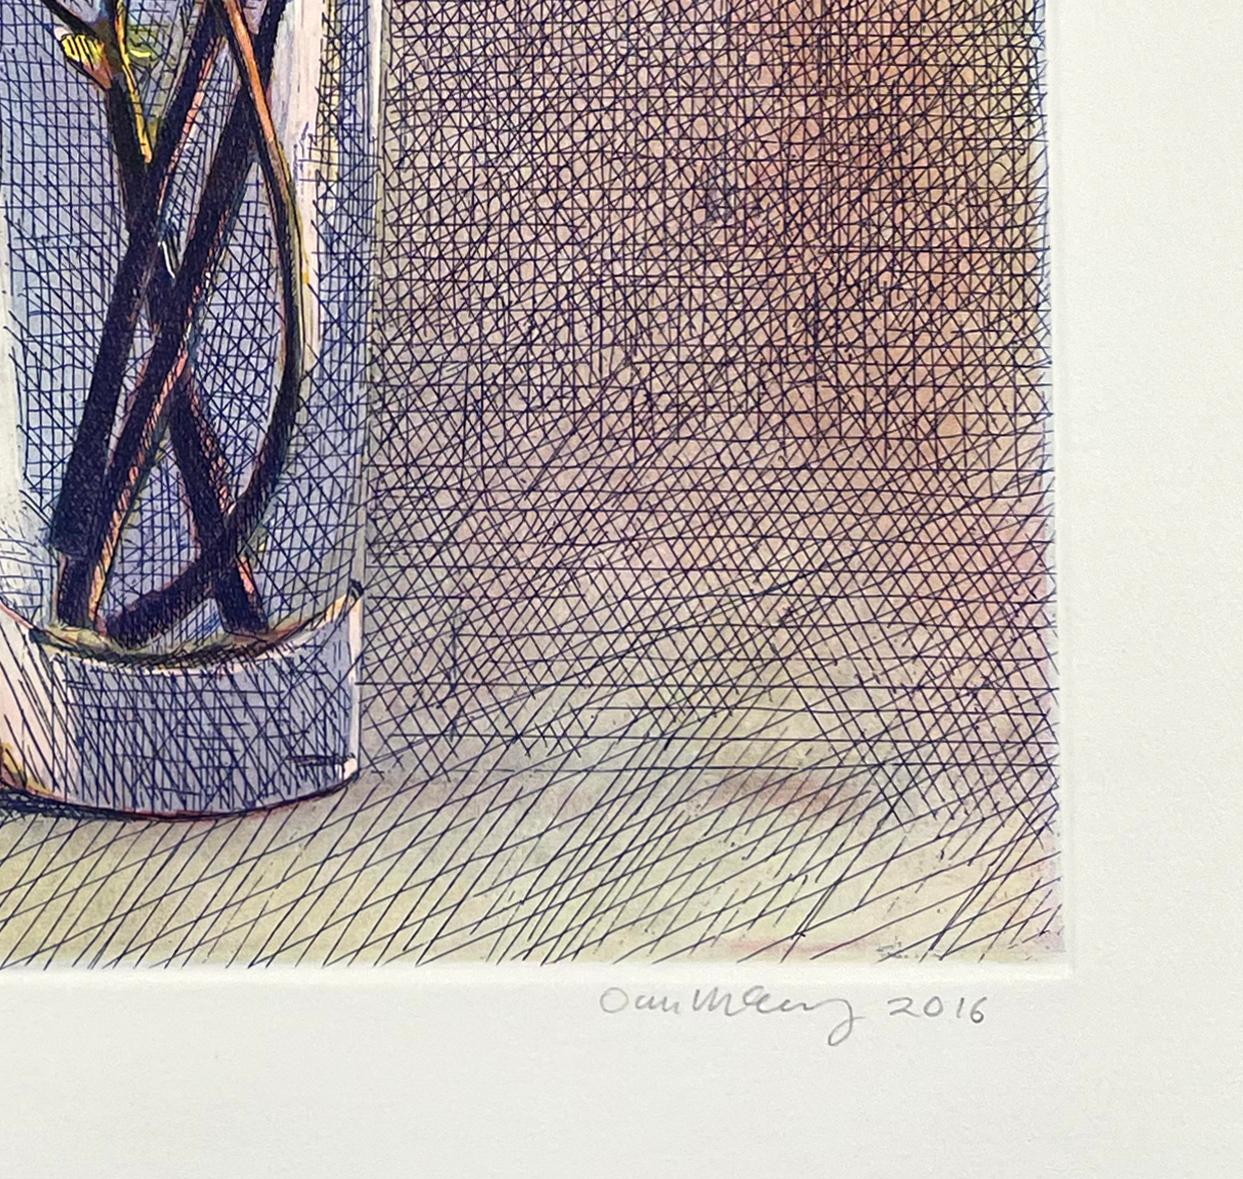 Medium: Etching and aquatint
Year: 2016
Image Size: 15.5 x 11.5 inches
Edition of 25, signed and titled by the artist

Lilacs in a simple glass vase with reflections.

McCleary was born in Santa Monica, California. He graduated from Loyola High